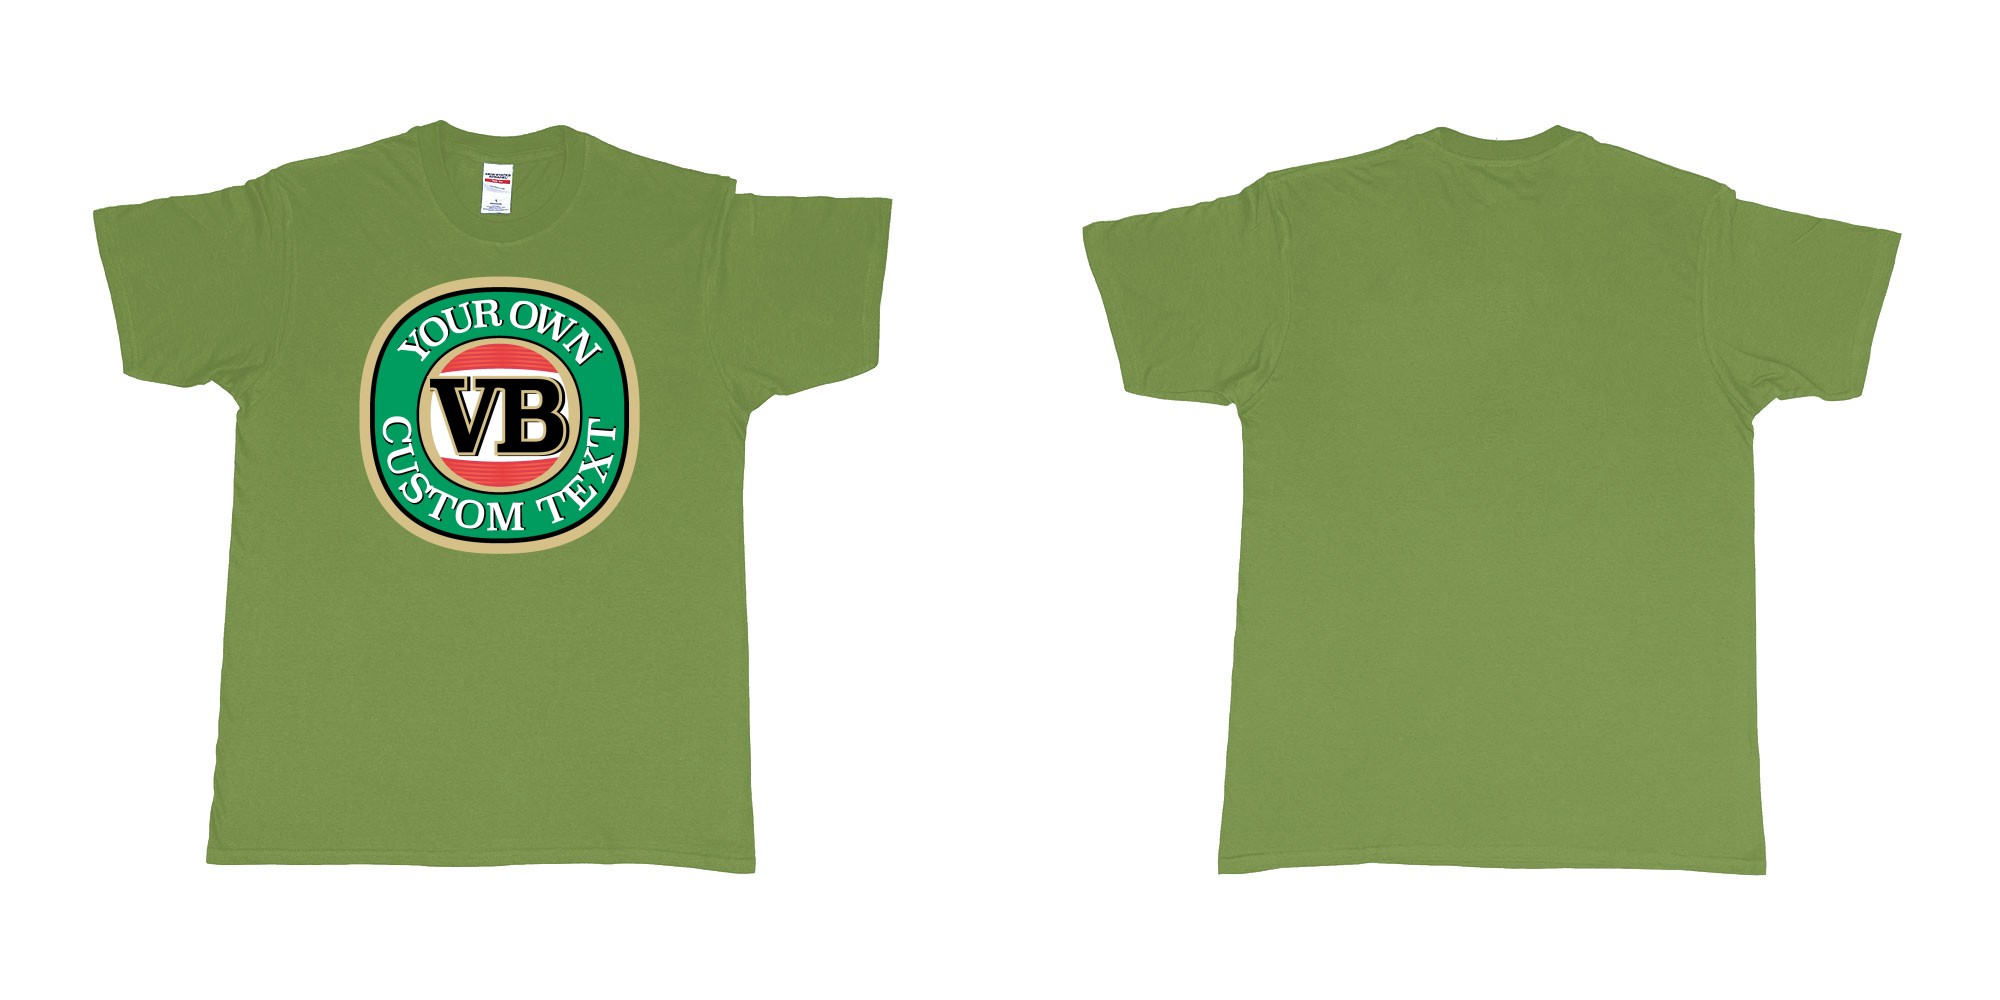 Custom tshirt design vb victoria bitter beer brand logo in fabric color military-green choice your own text made in Bali by The Pirate Way